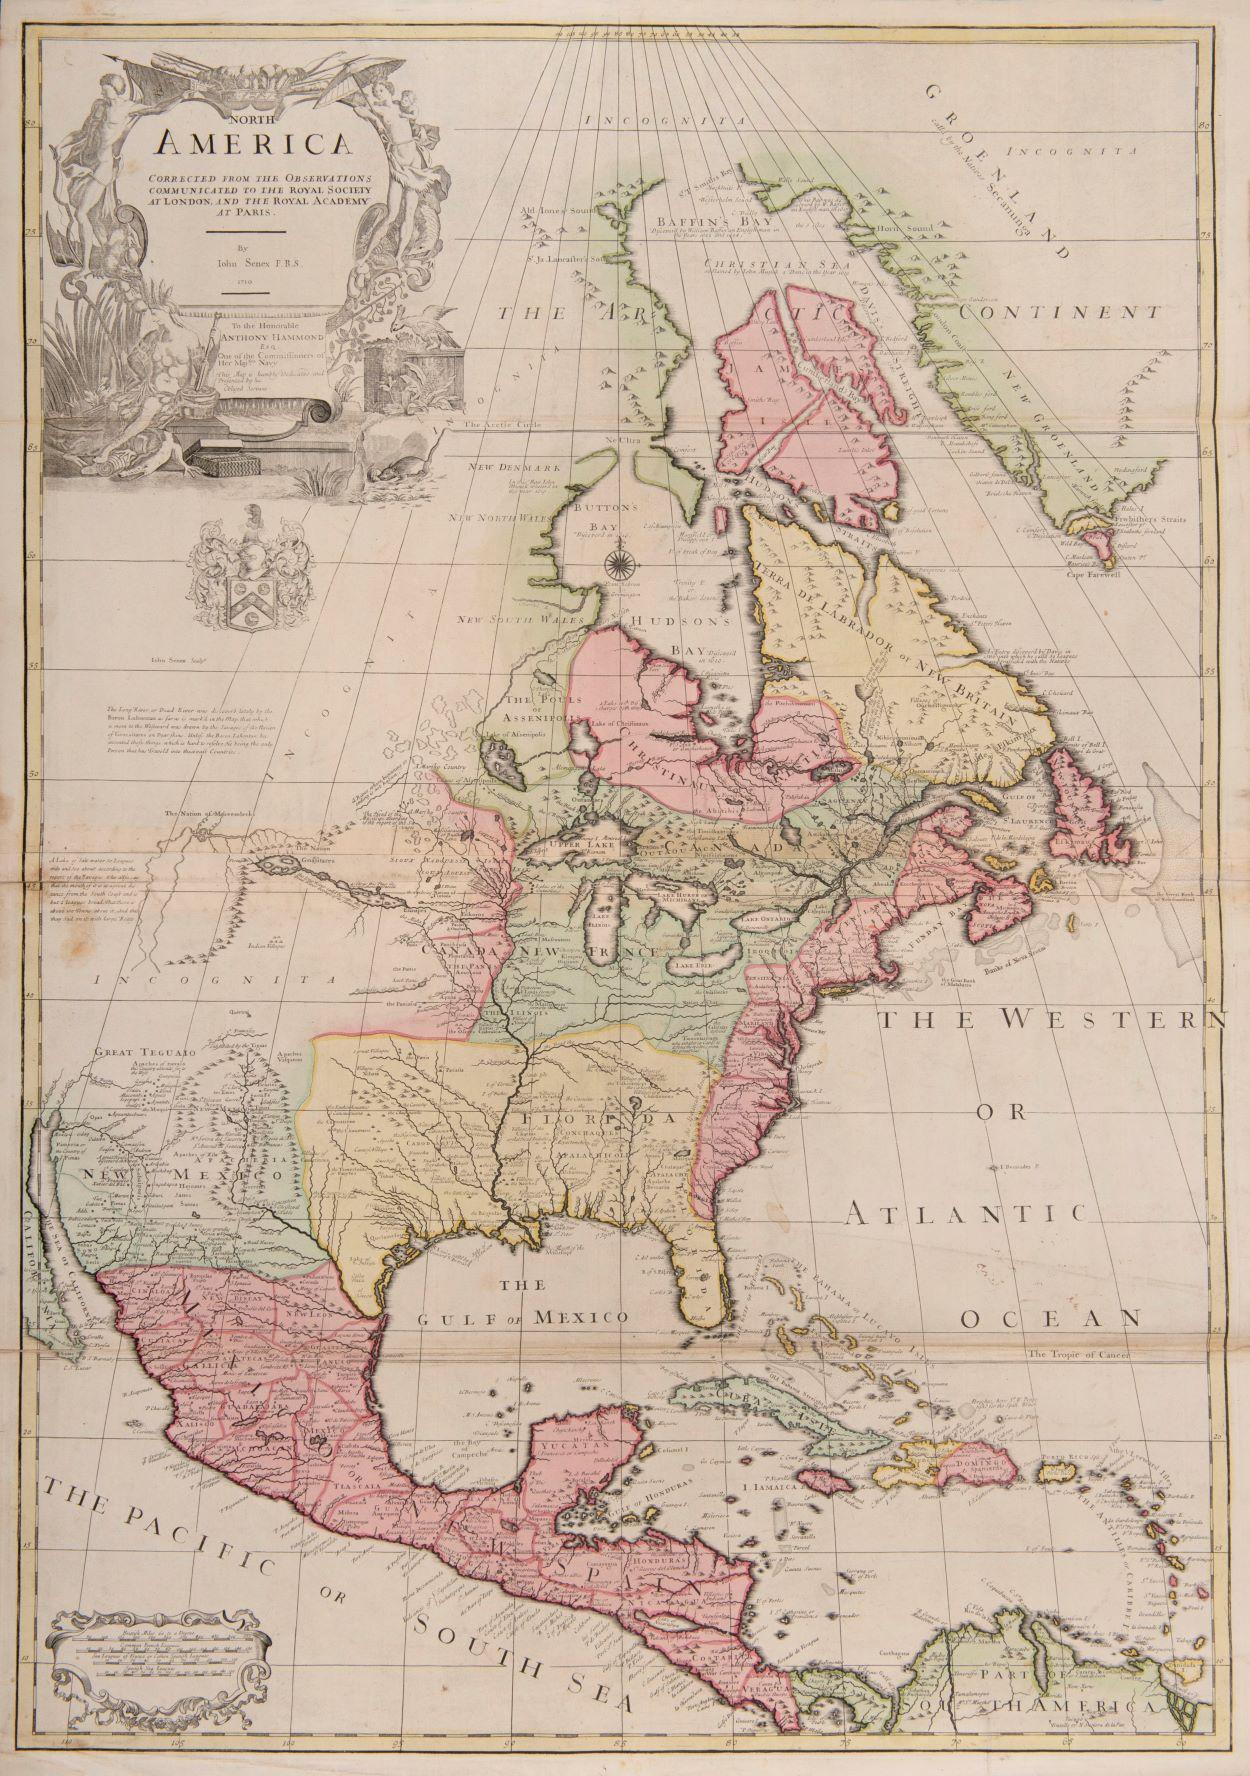 one of the earliest large-scale English maps of North America - Art by John Senex